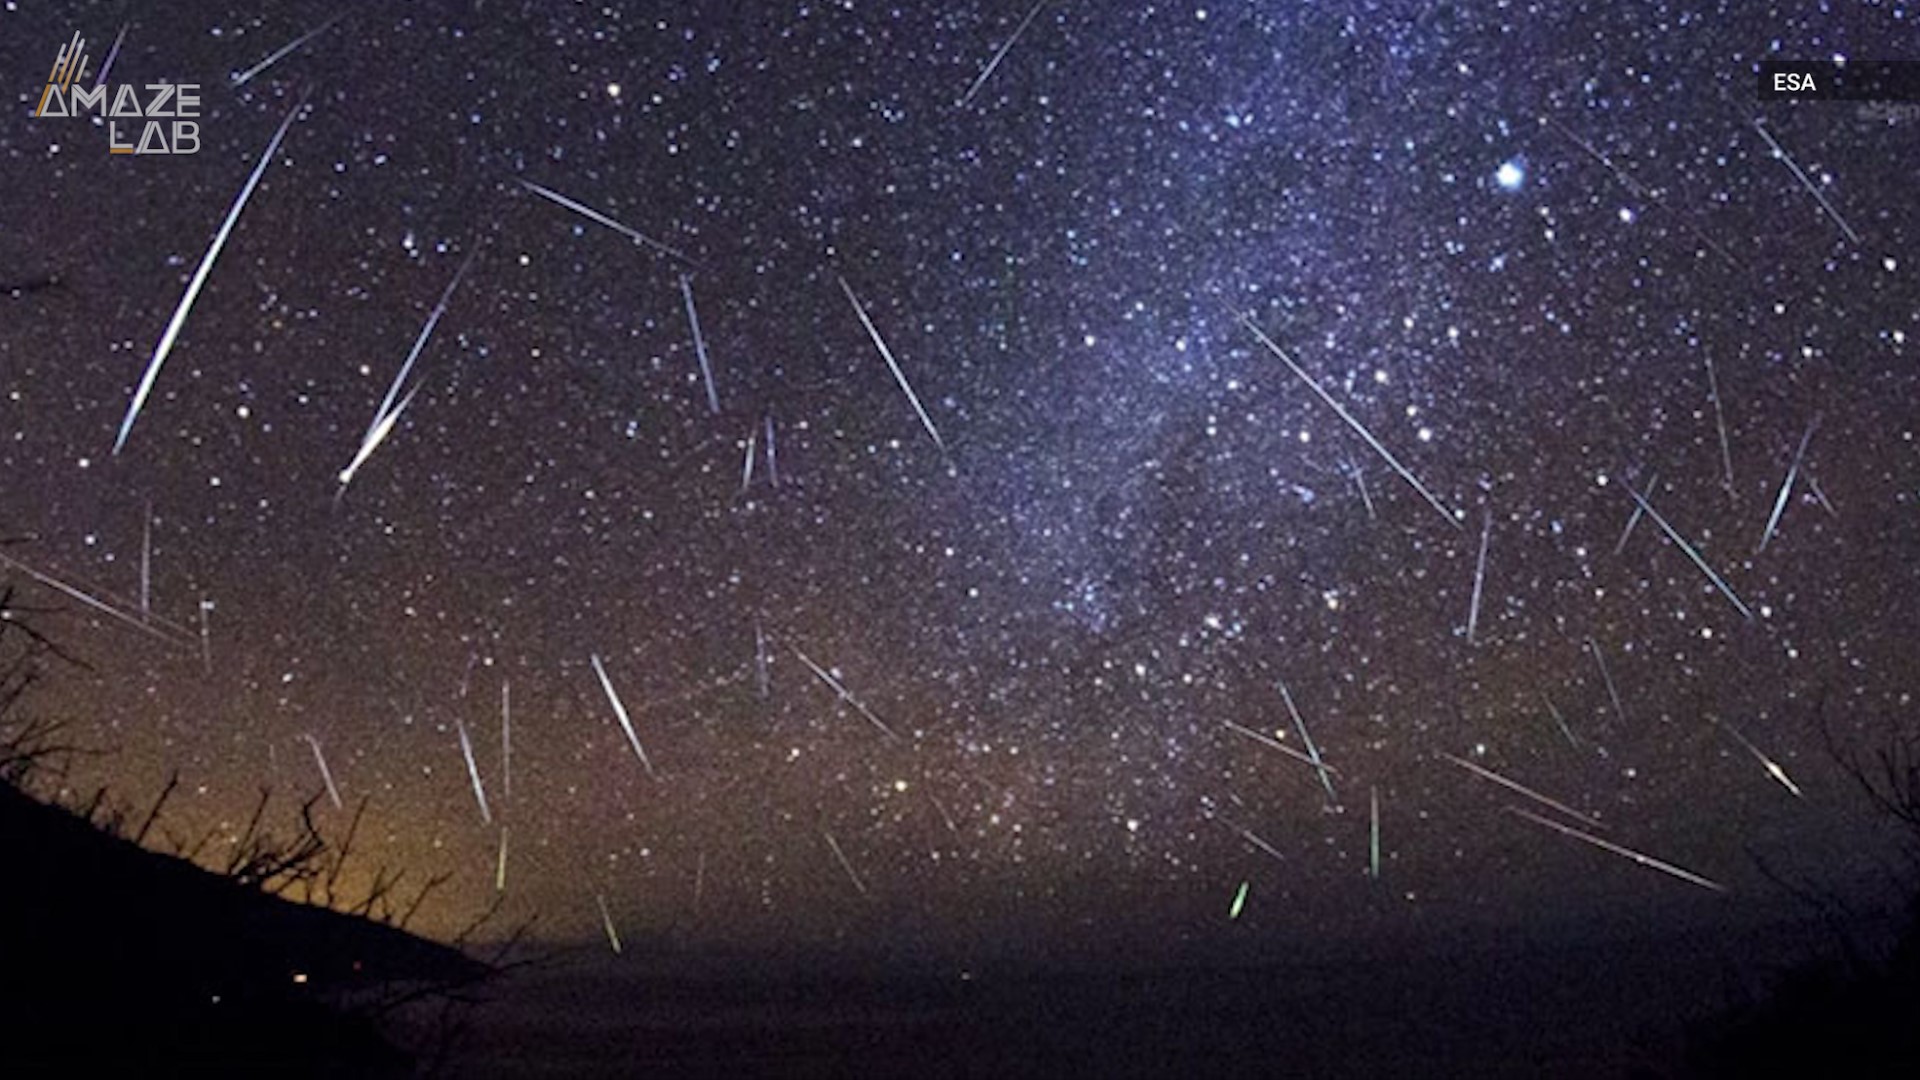 The end of July brings the peak of a beautiful meteor shower that passes through our skies once every year. Bonus: The Perseid meteor shower has also begun the rise to its peak.